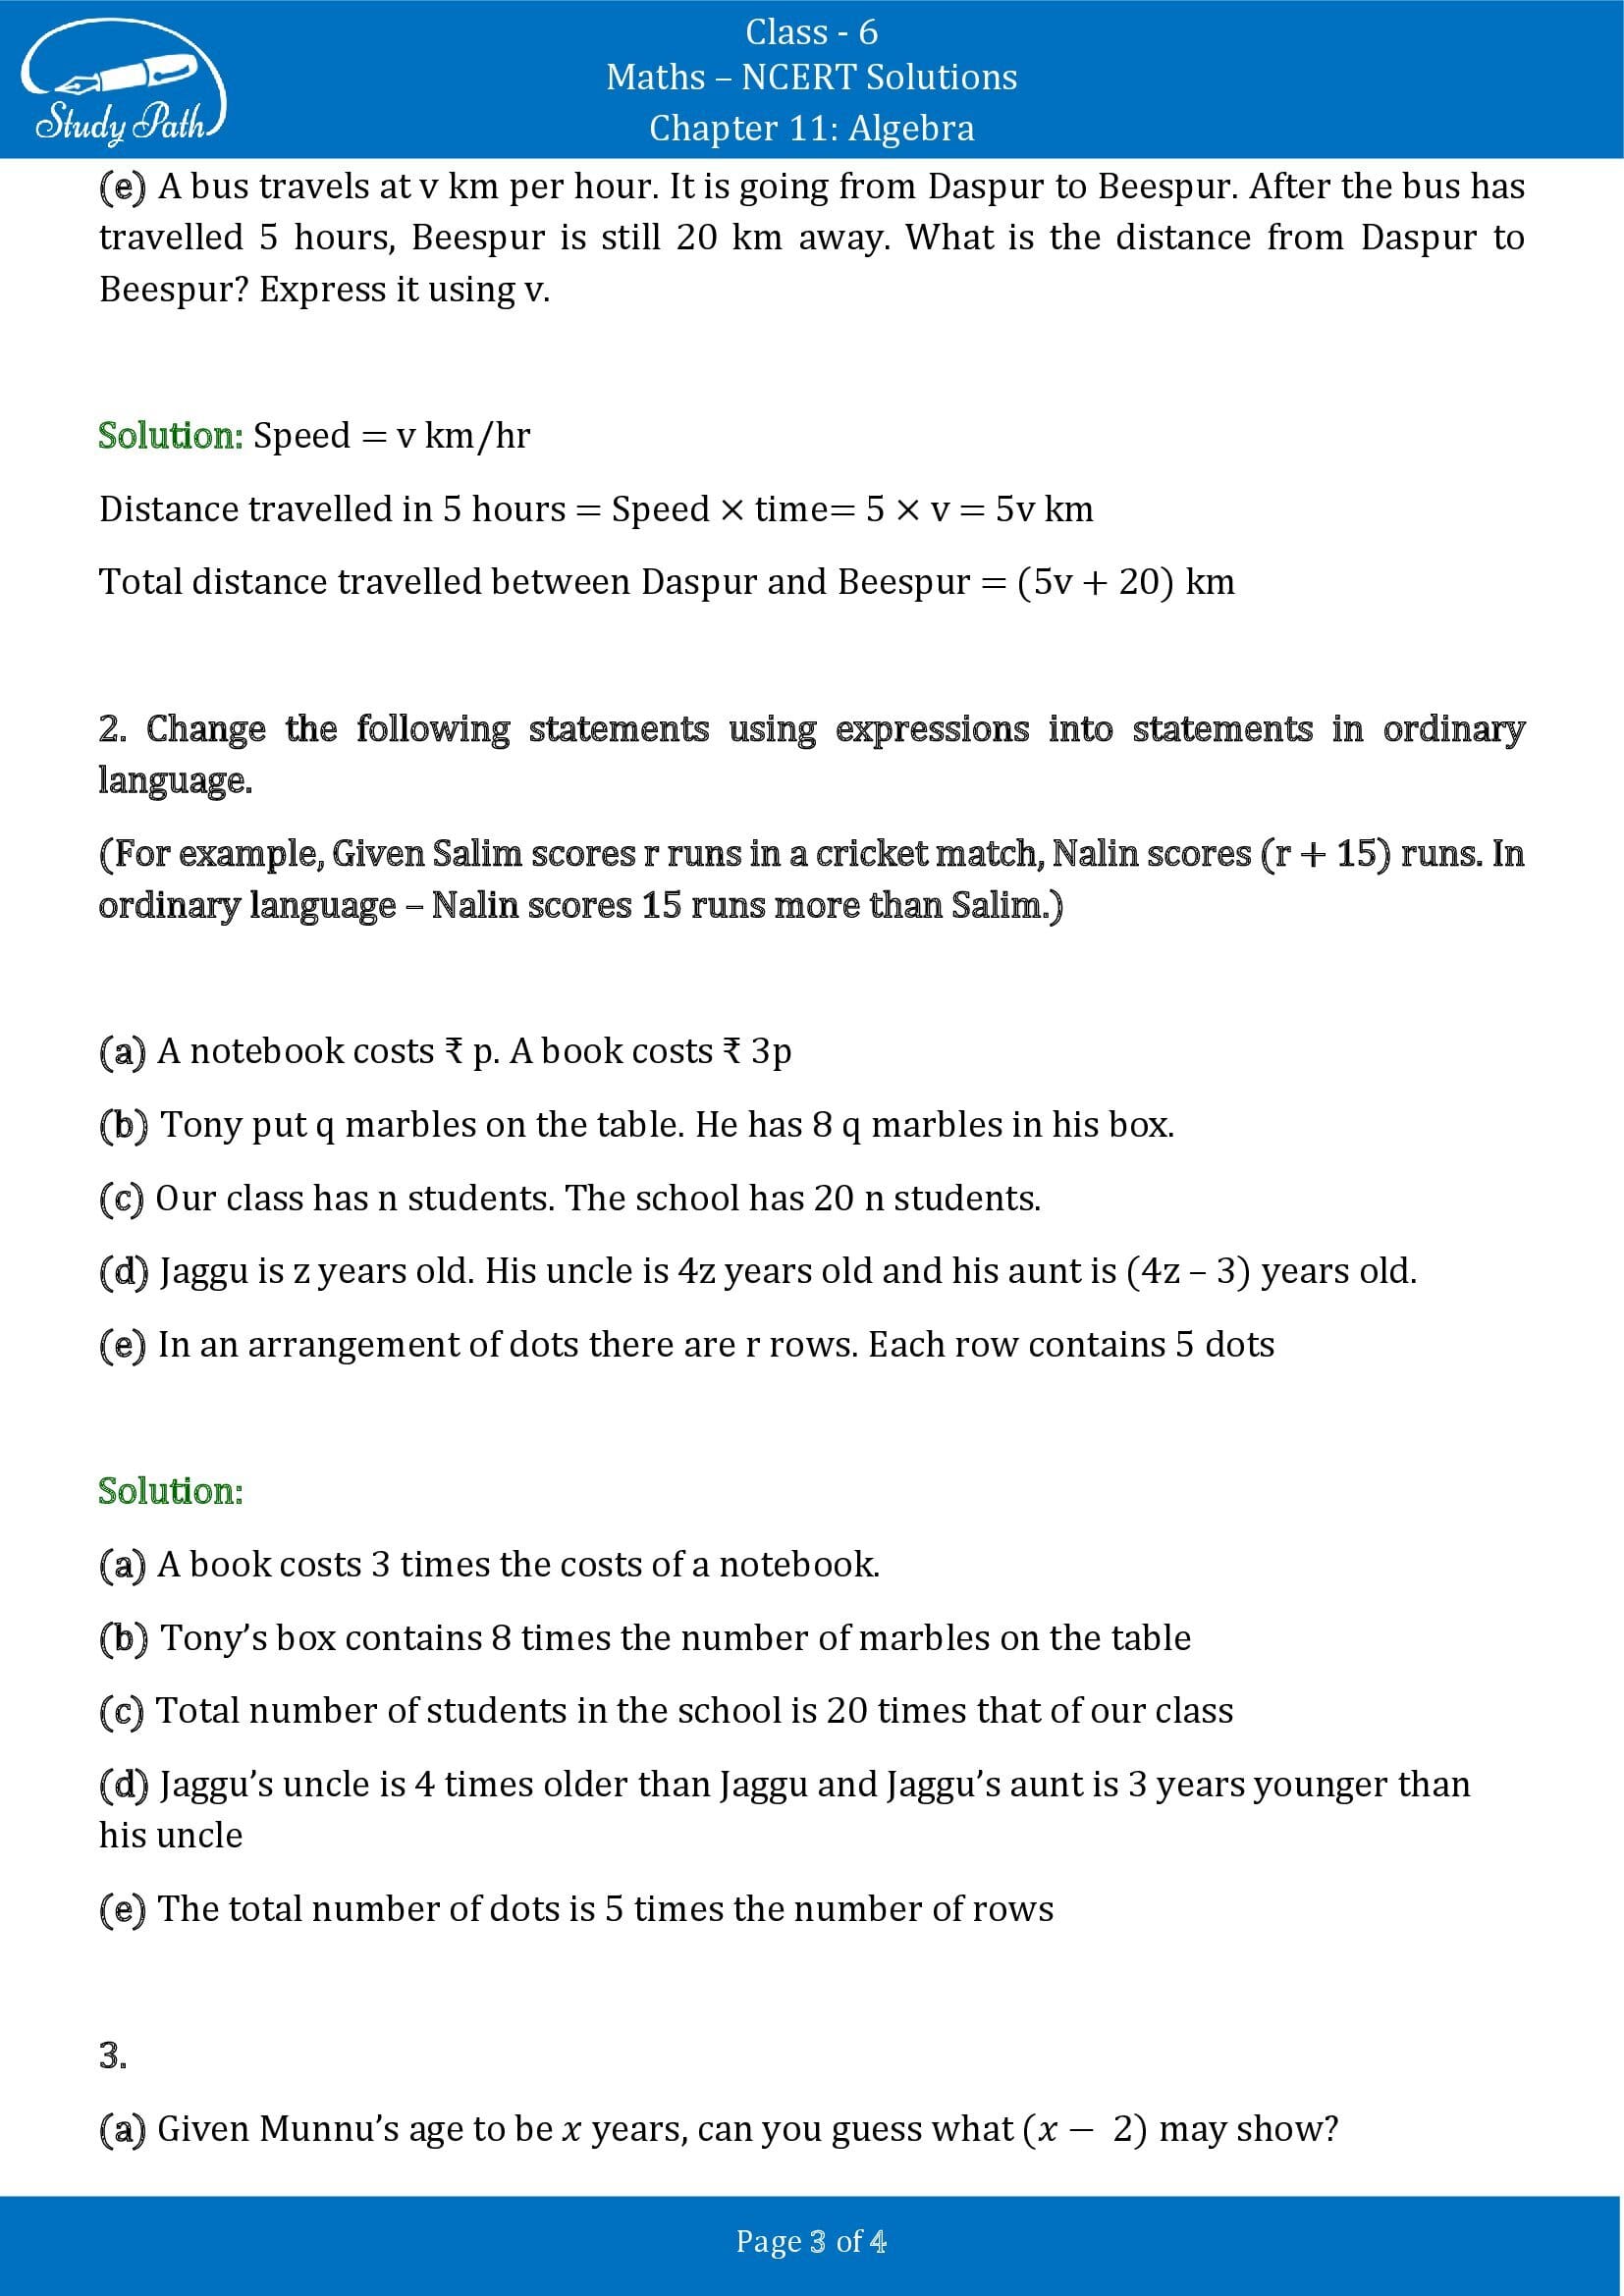 NCERT Solutions for Class 6 Maths Chapter 11 Algebra Exercise 11.4 00003